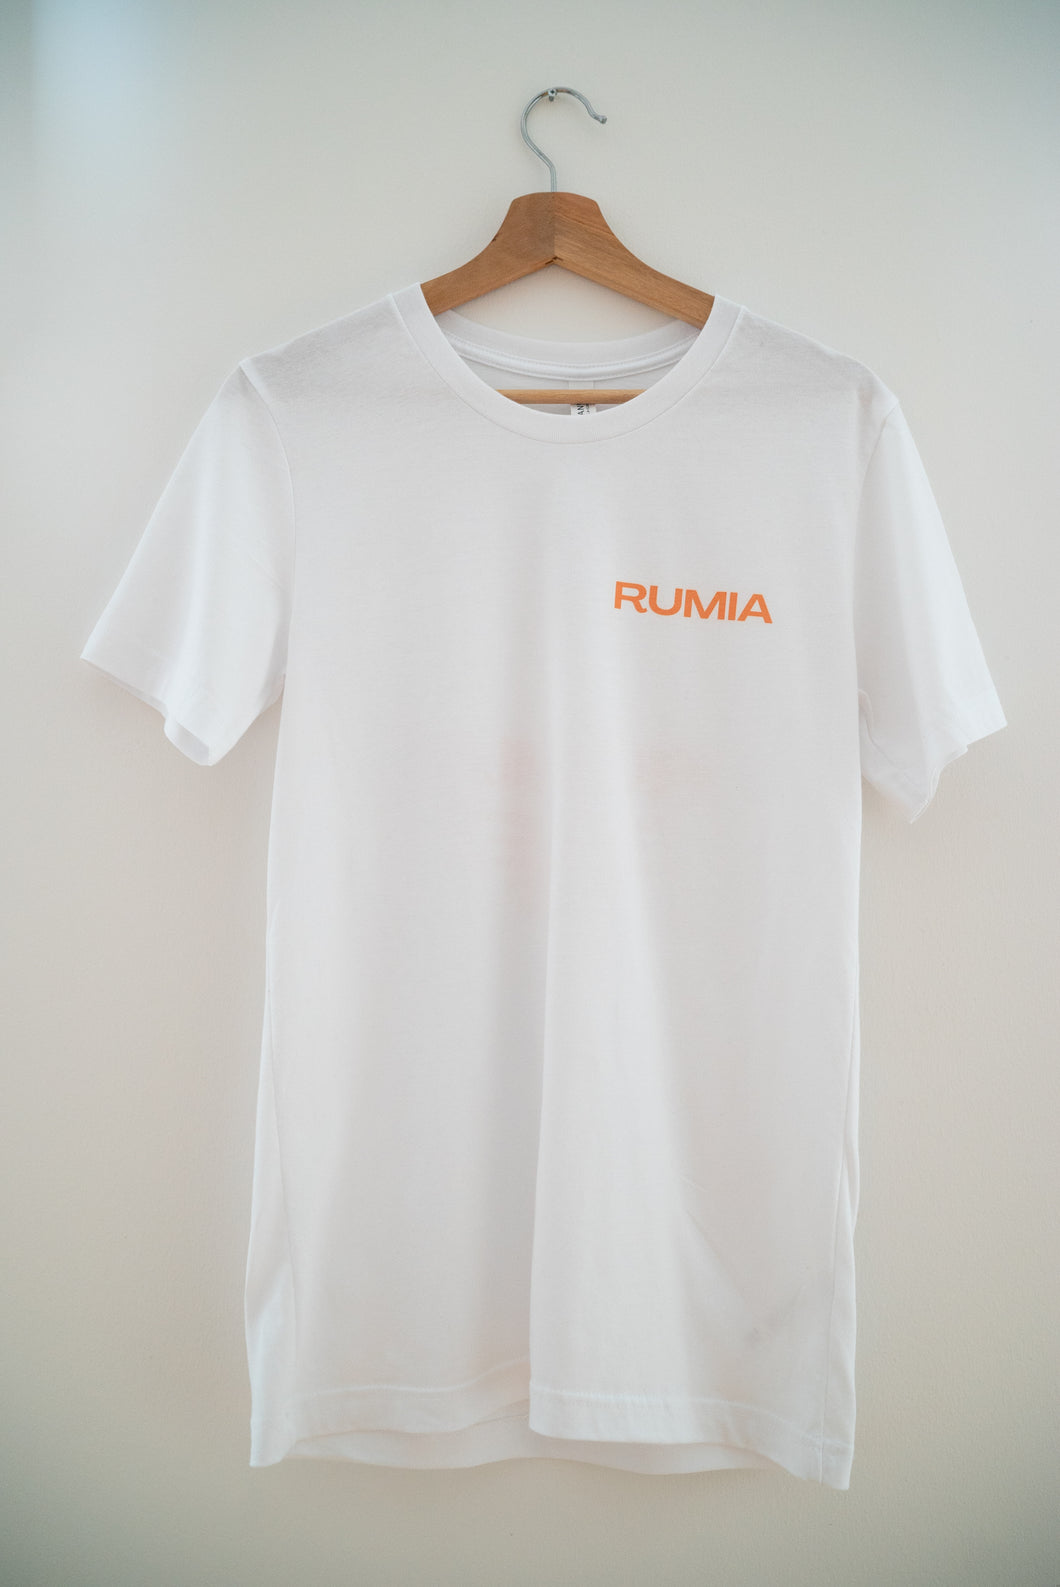 Rumia Special Edition T-Shirt